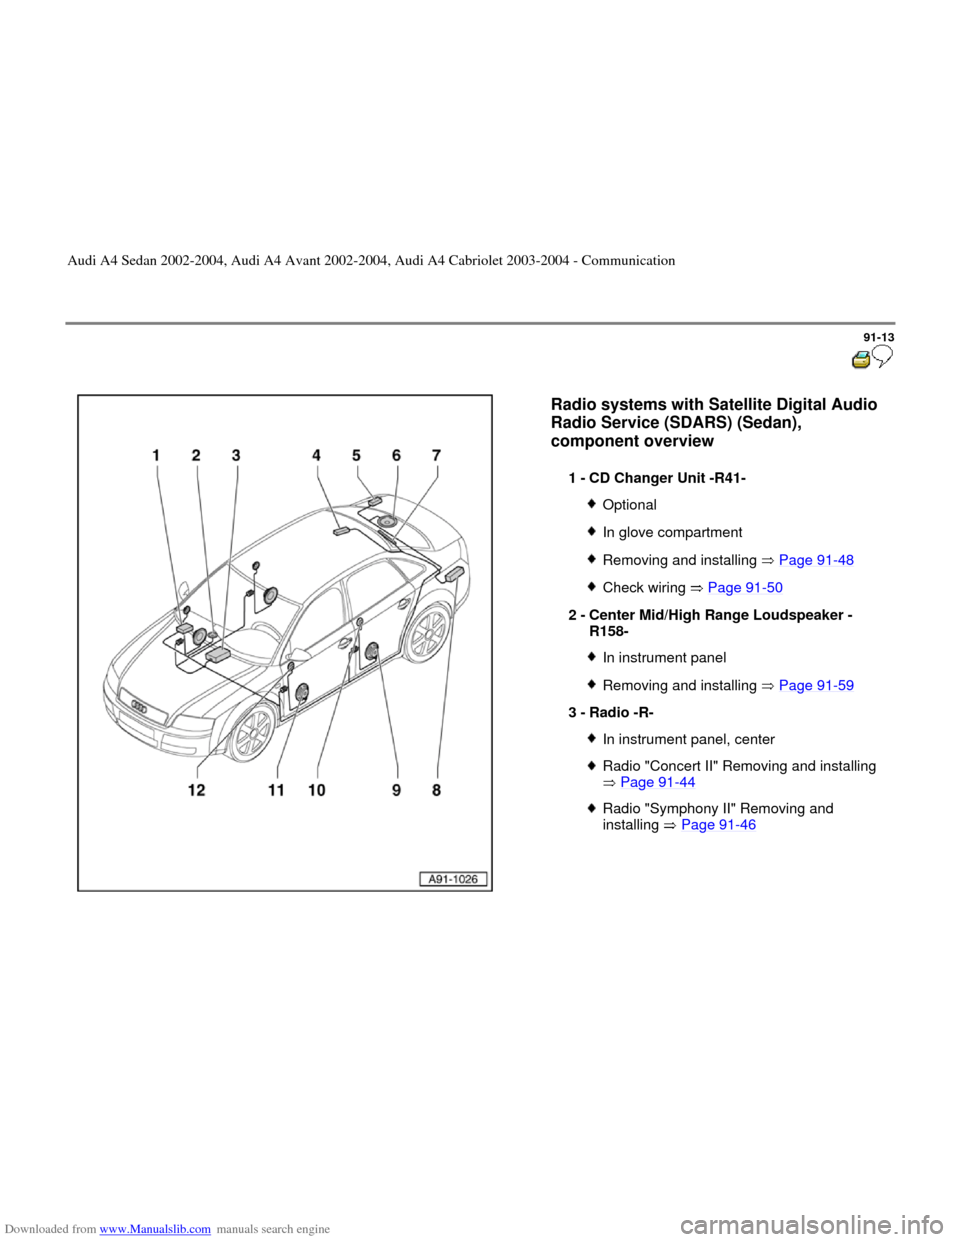 AUDI A4 2002 B5 / 1.G Radio System General Information Downloaded from www.Manualslib.com manuals search engine 91-13
 
  
Radio systems with Satellite Digital Audio 
Radio Service (SDARS) (Sedan), 
component overview 
 
1 - 
CD Changer Unit -R41- 
Option